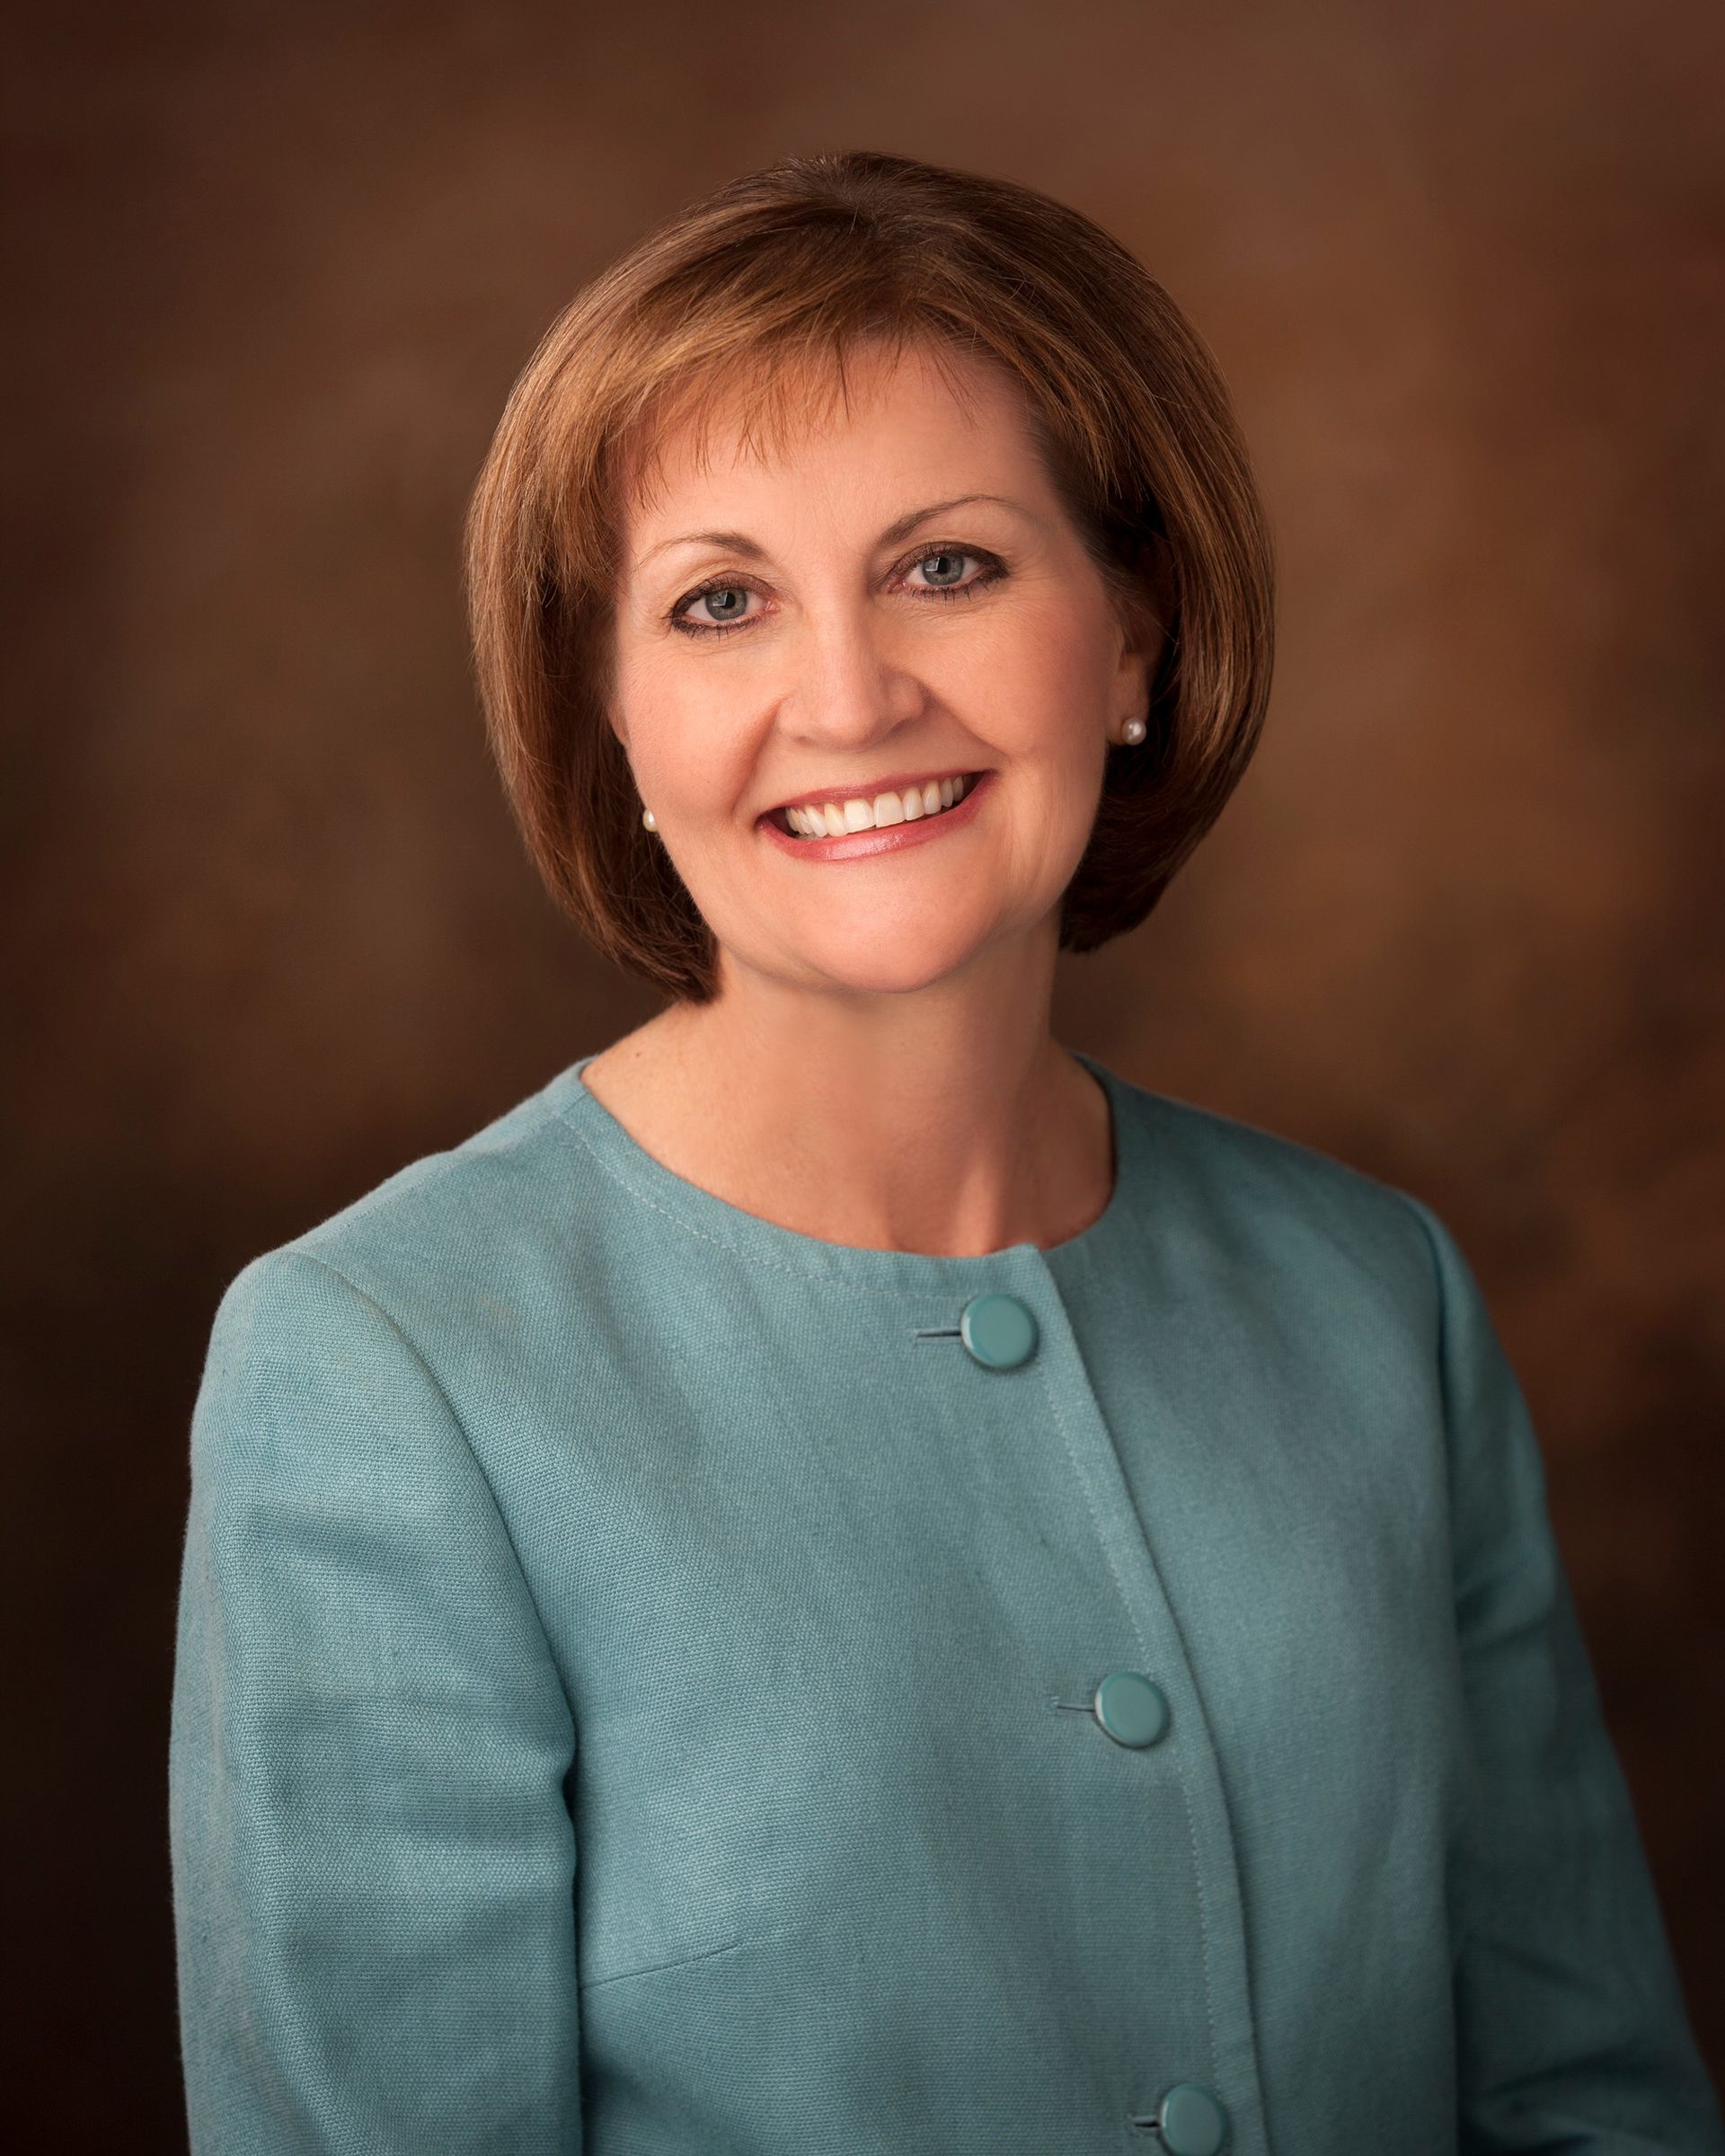 A portrait of Linda K. Burton, who was the 16th general president of the Relief Society from 2012 to 2017.